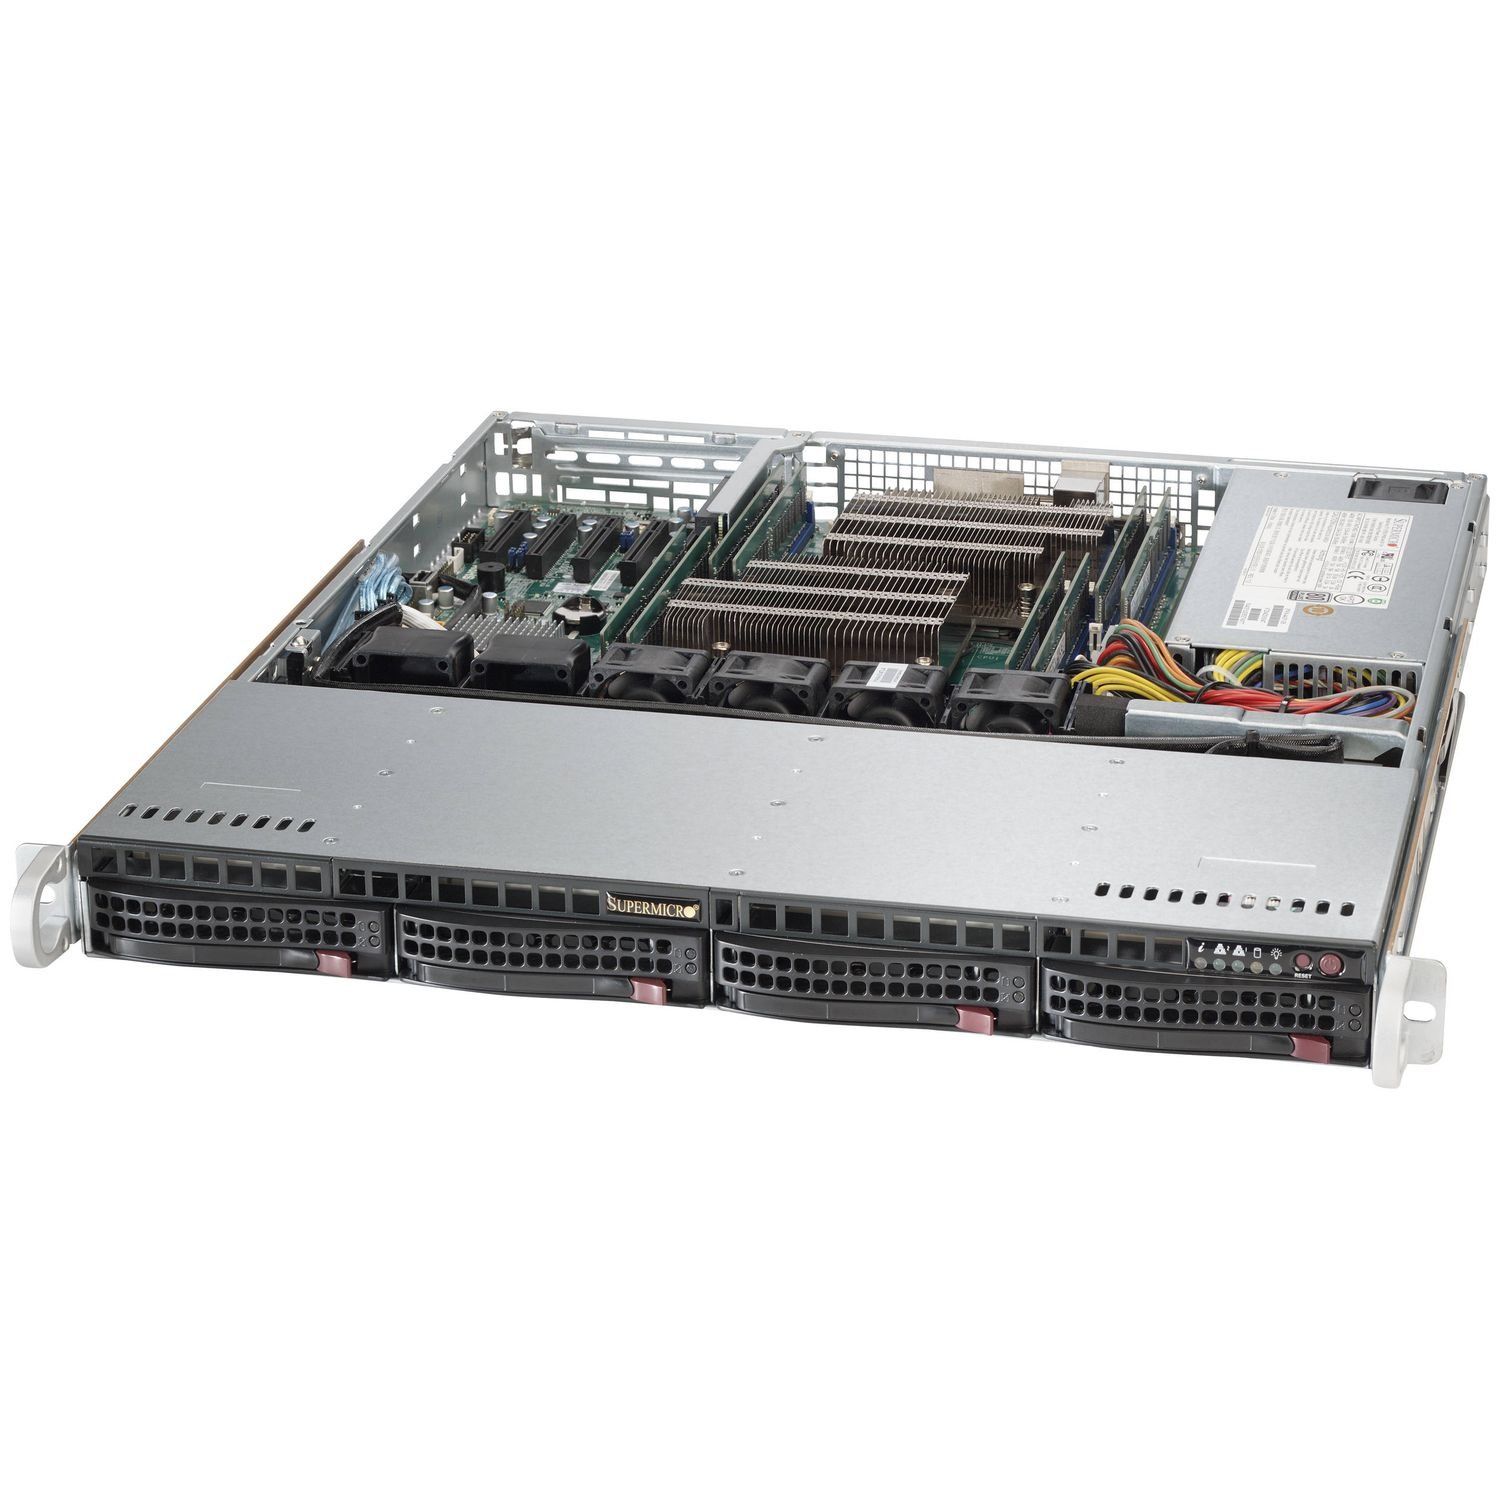 Supermicro 1.1U Chassis for motherboard support size: (12